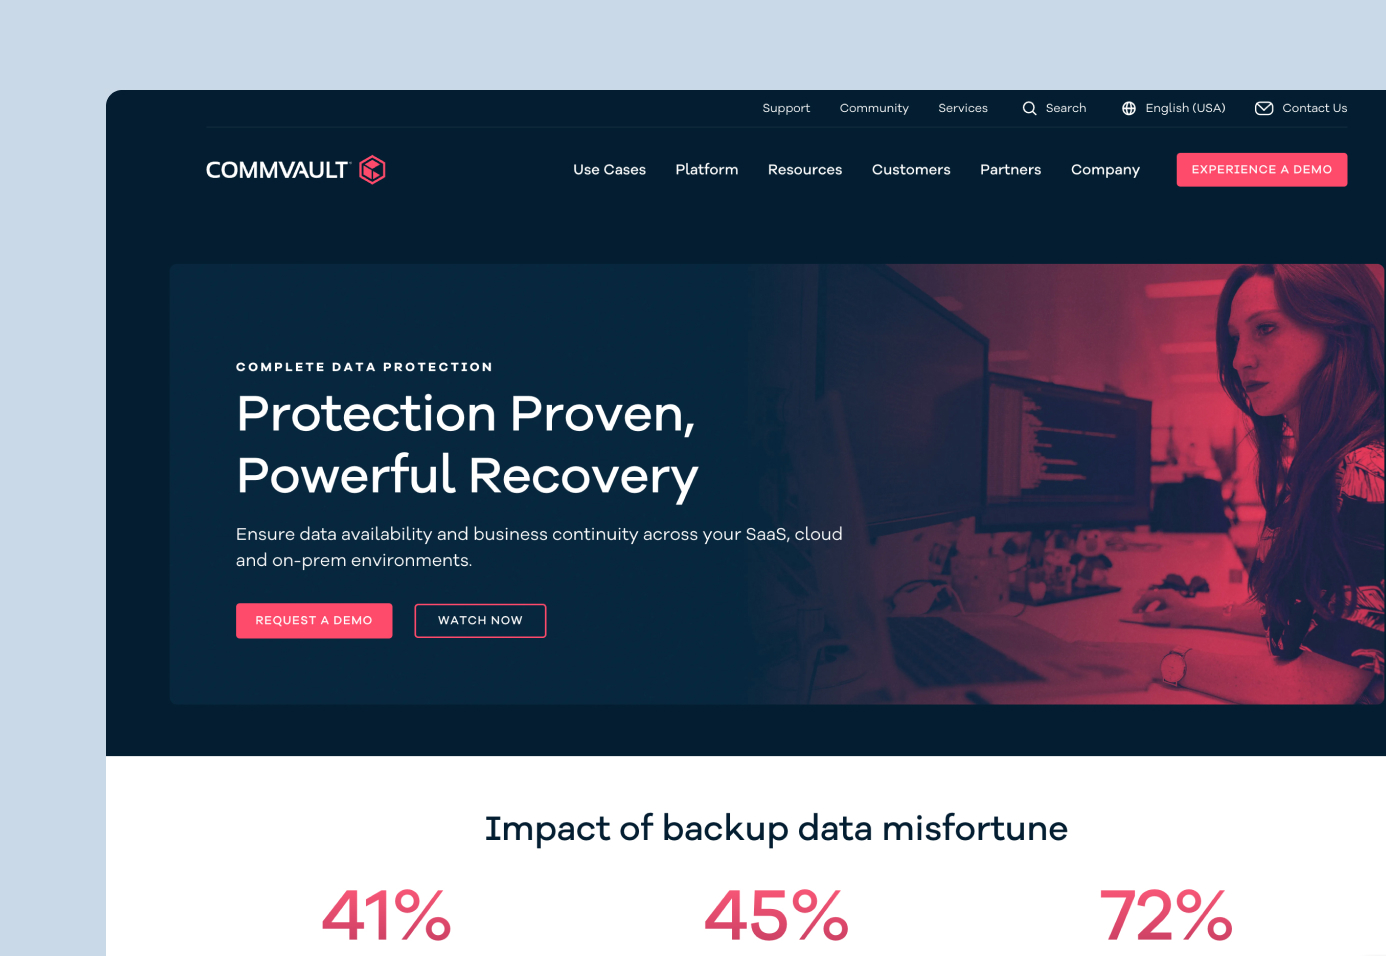 The Commvault homepage